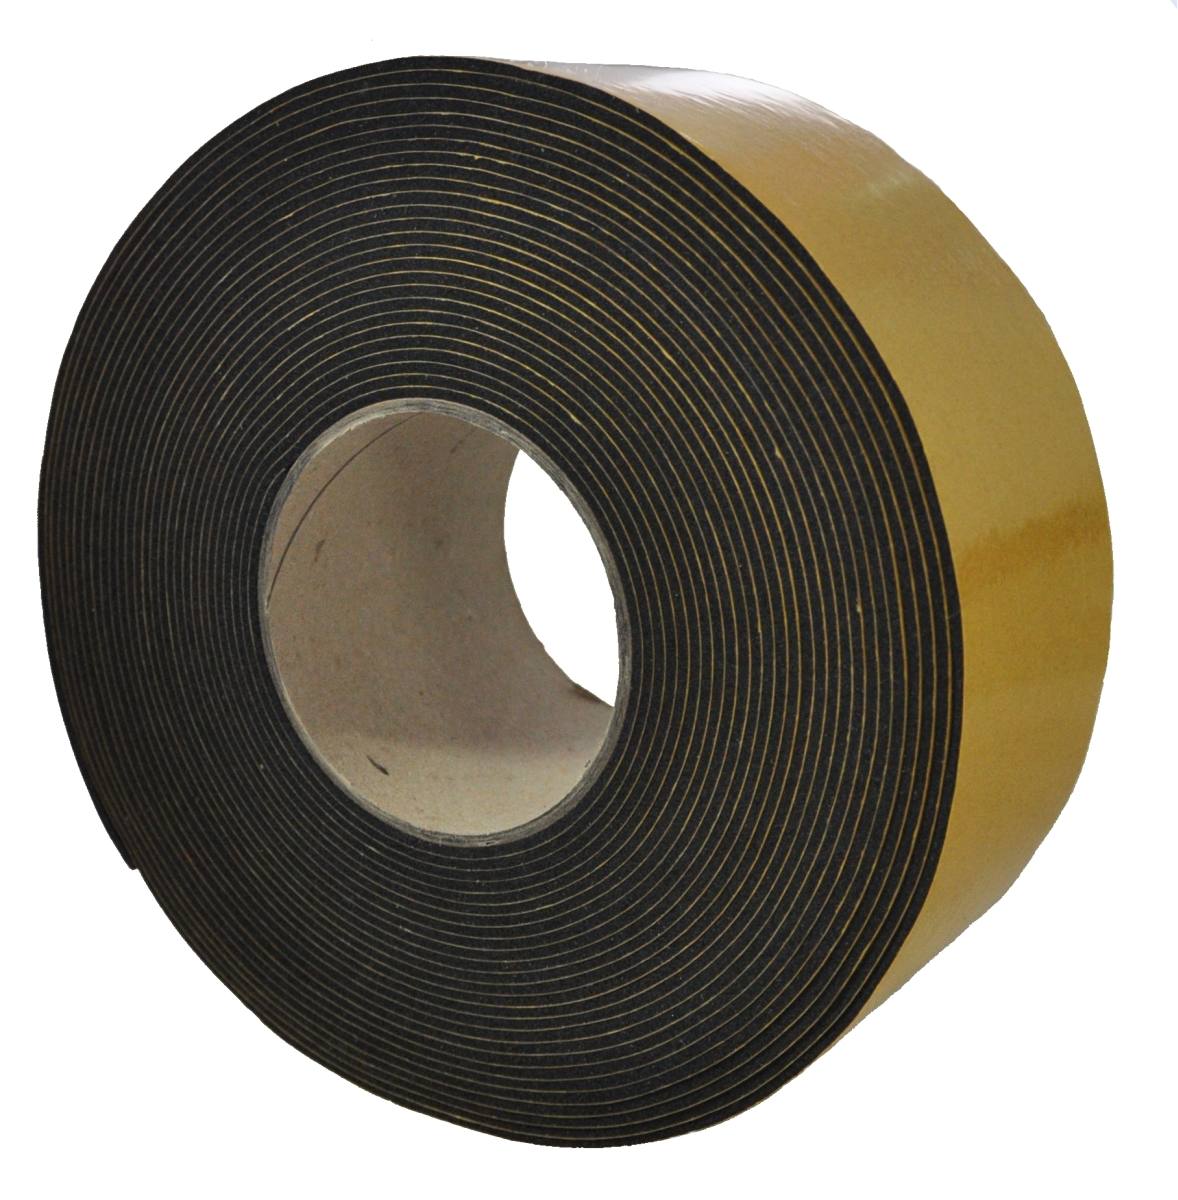 S-K-S EPDM 5mmx12mmx10m black self-adhesive on one side